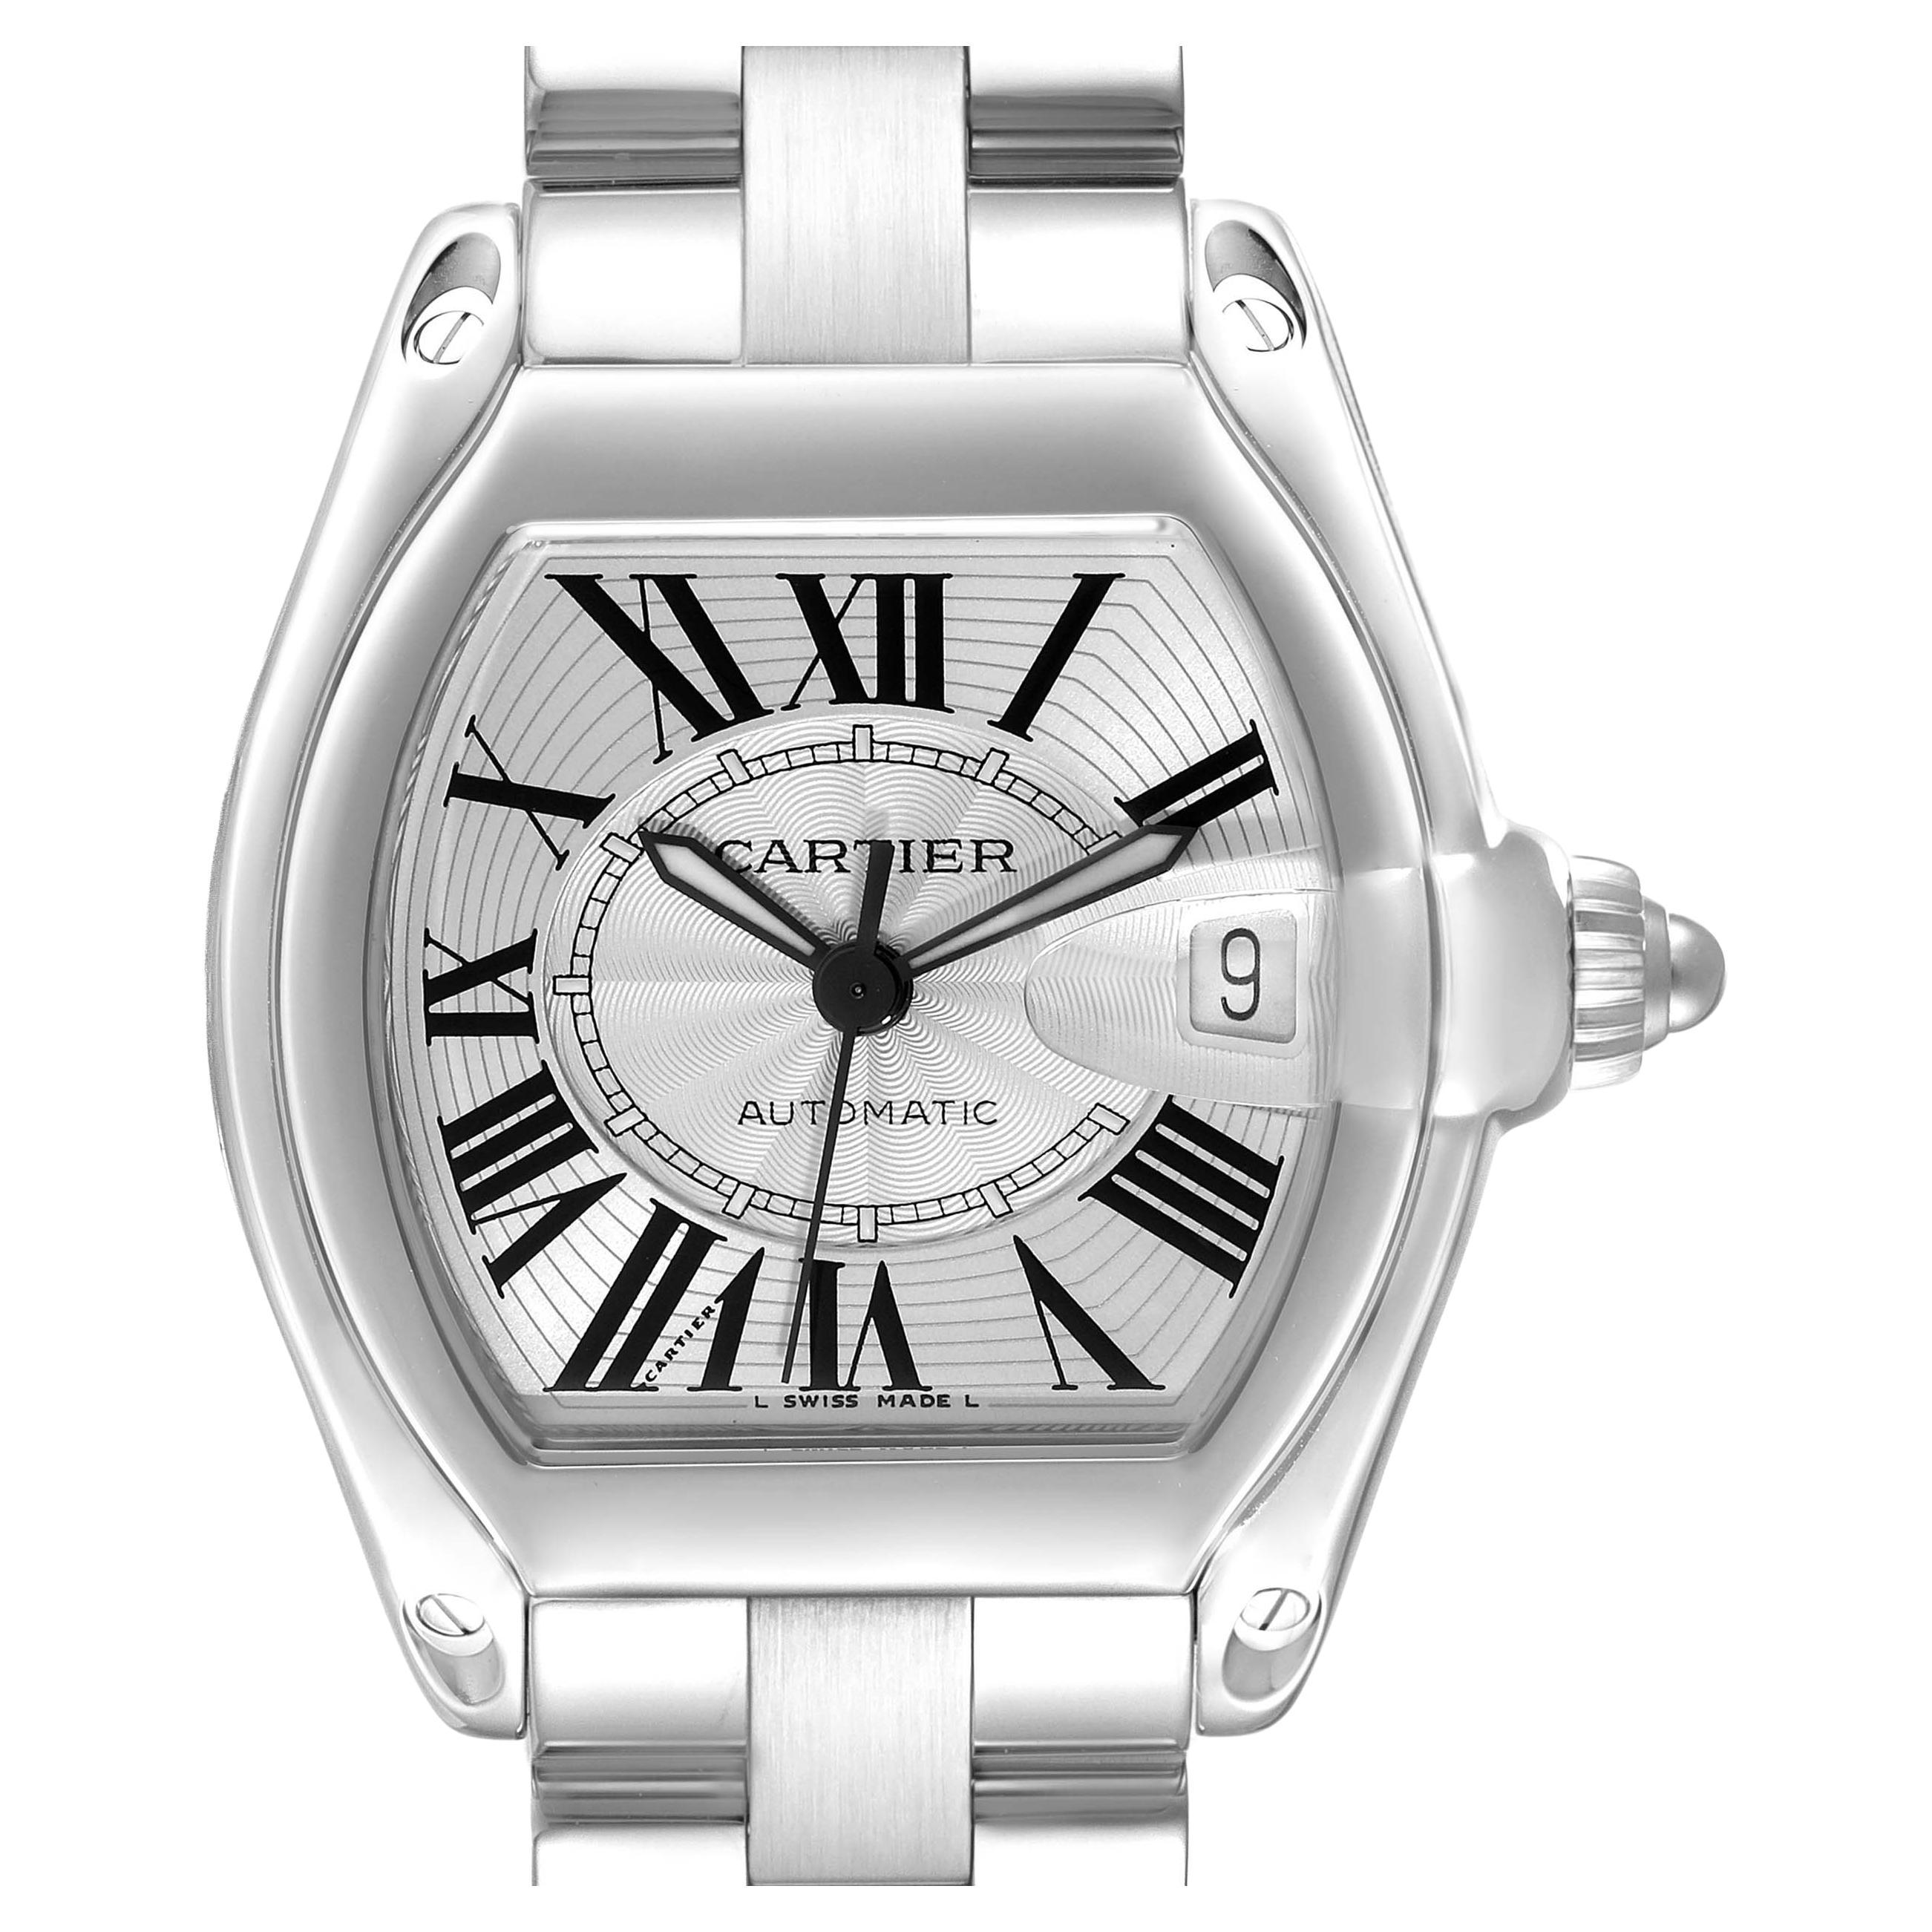 Cartier Roadster Large Silver Dial Steel Mens Watch W62025V3